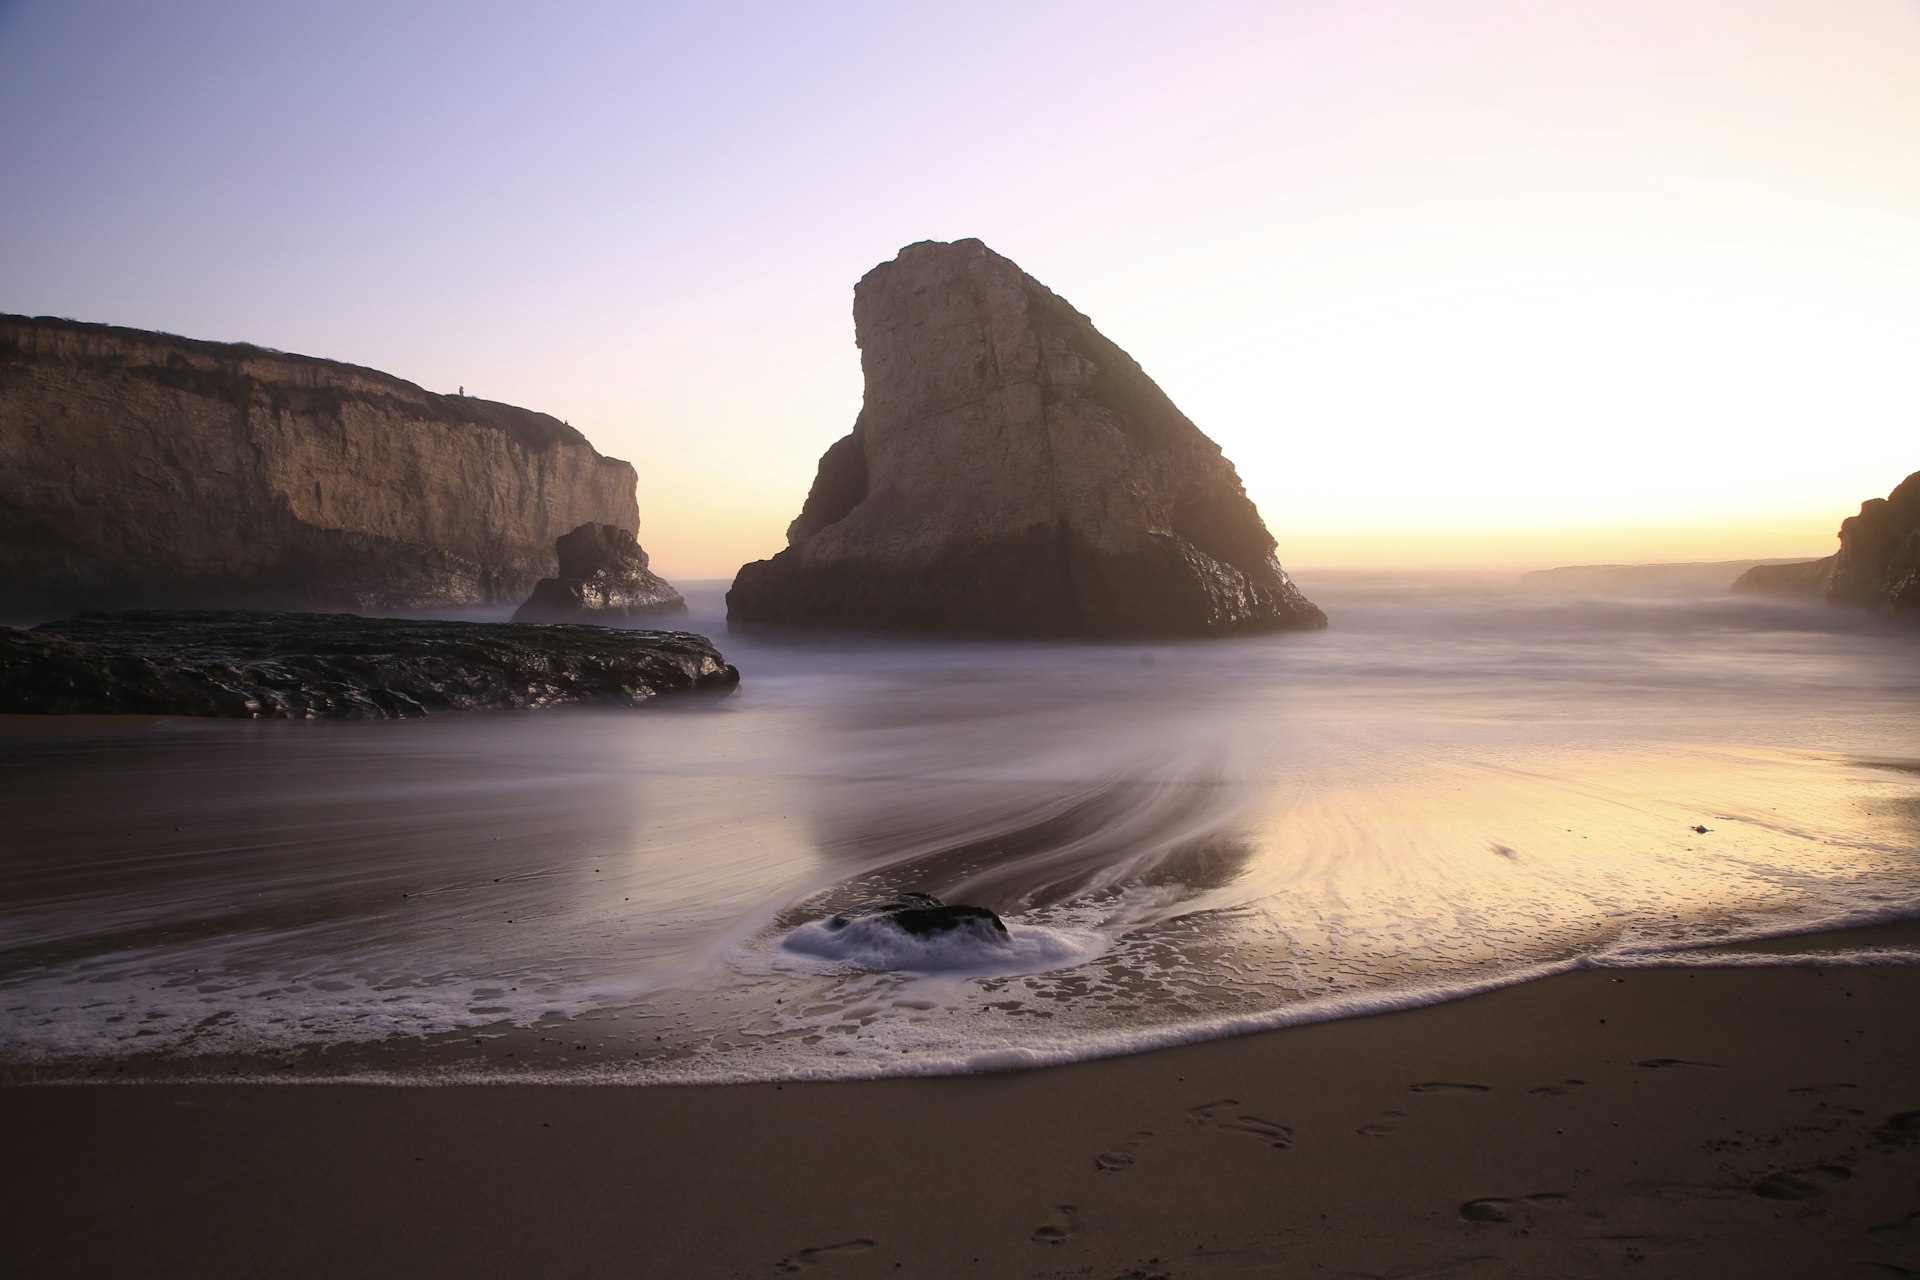 The distinctive shark-fin-shaped rock jutting out of the ocean at Shark Fin Cove